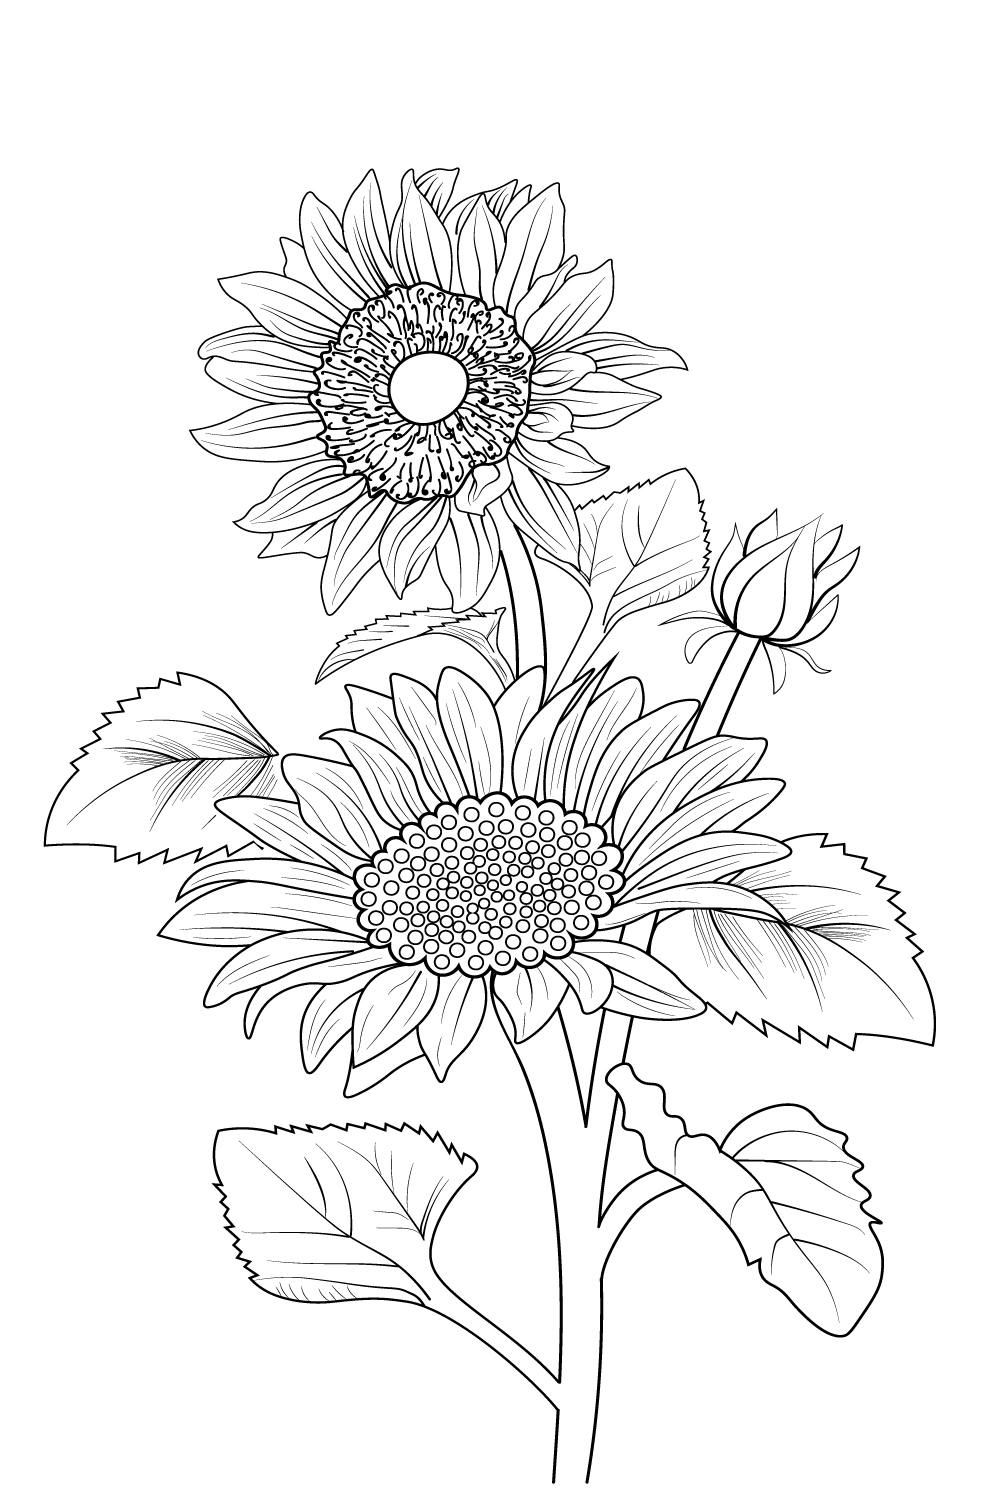 sunflower, sunflower drawing, sunflower drawing for kids, small sunflower drawing for kids, small sunflower drawing tattoo, sunflower tattoo black and white, black and white vintage sunflower tattoo, realistic black and grey sunflower tattoo, pinterest preview image.